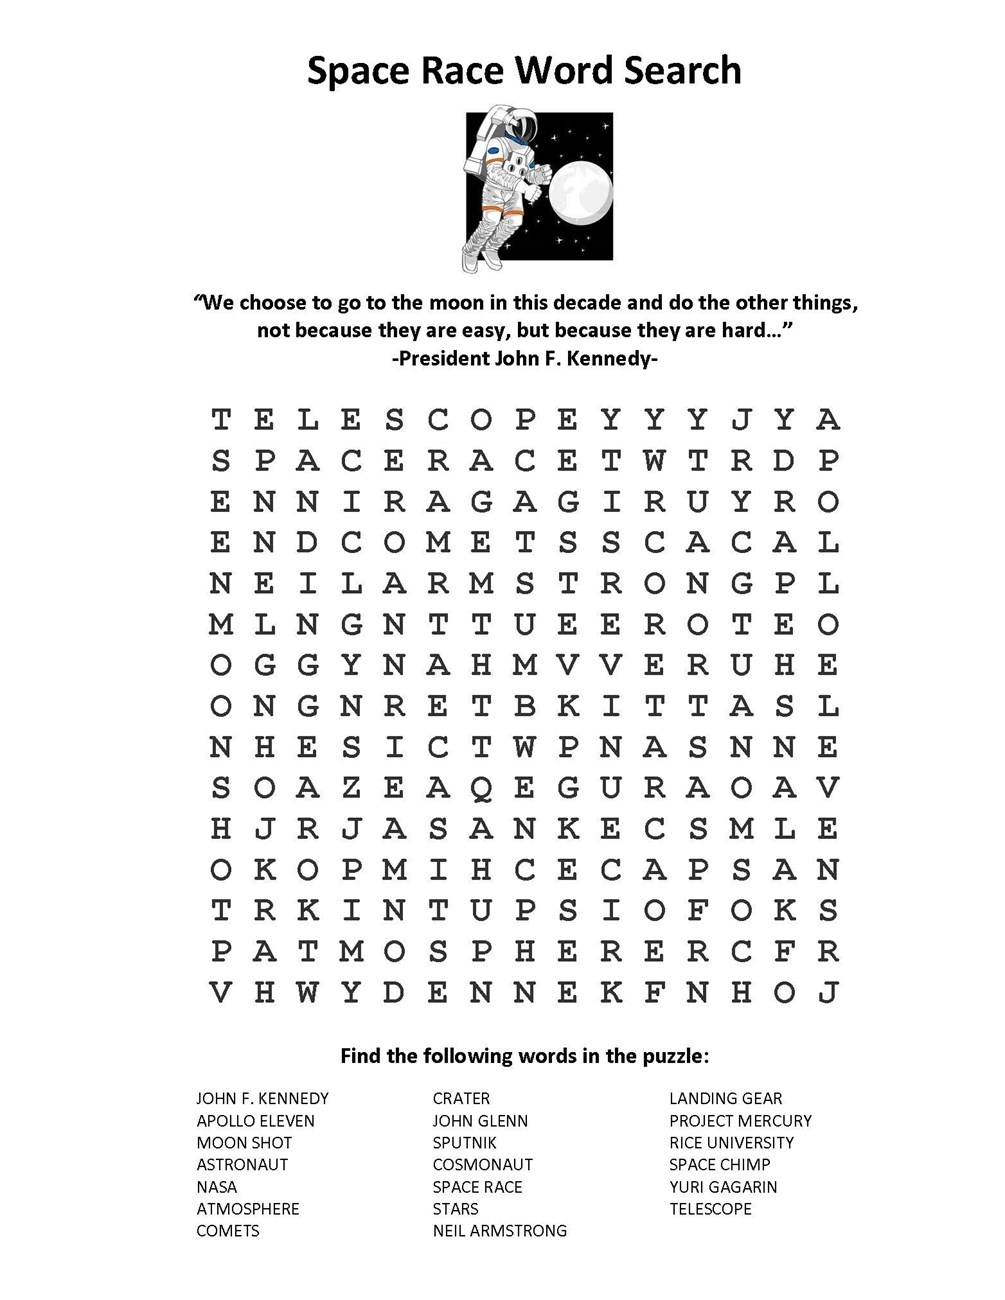 A word search puzzle that uses space race terms